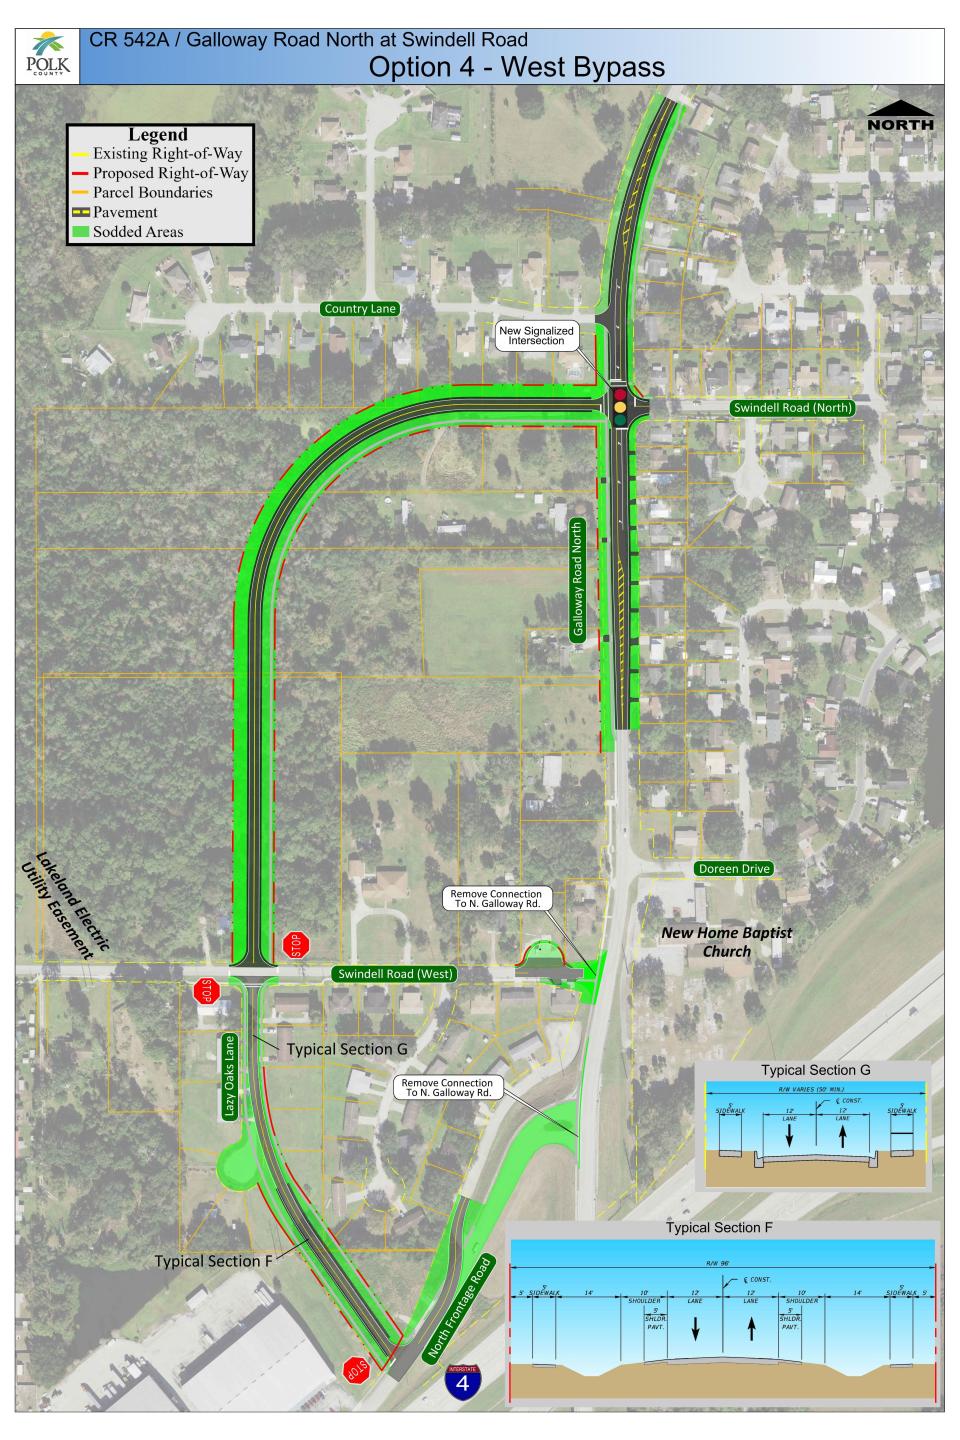 A final option for Swindell-Galloway would look much like Option 1, except that an extension would be built from Lazy Oaks Lane to North Frontage Road, and the Frontage Road connection to Galloway would also be closed.